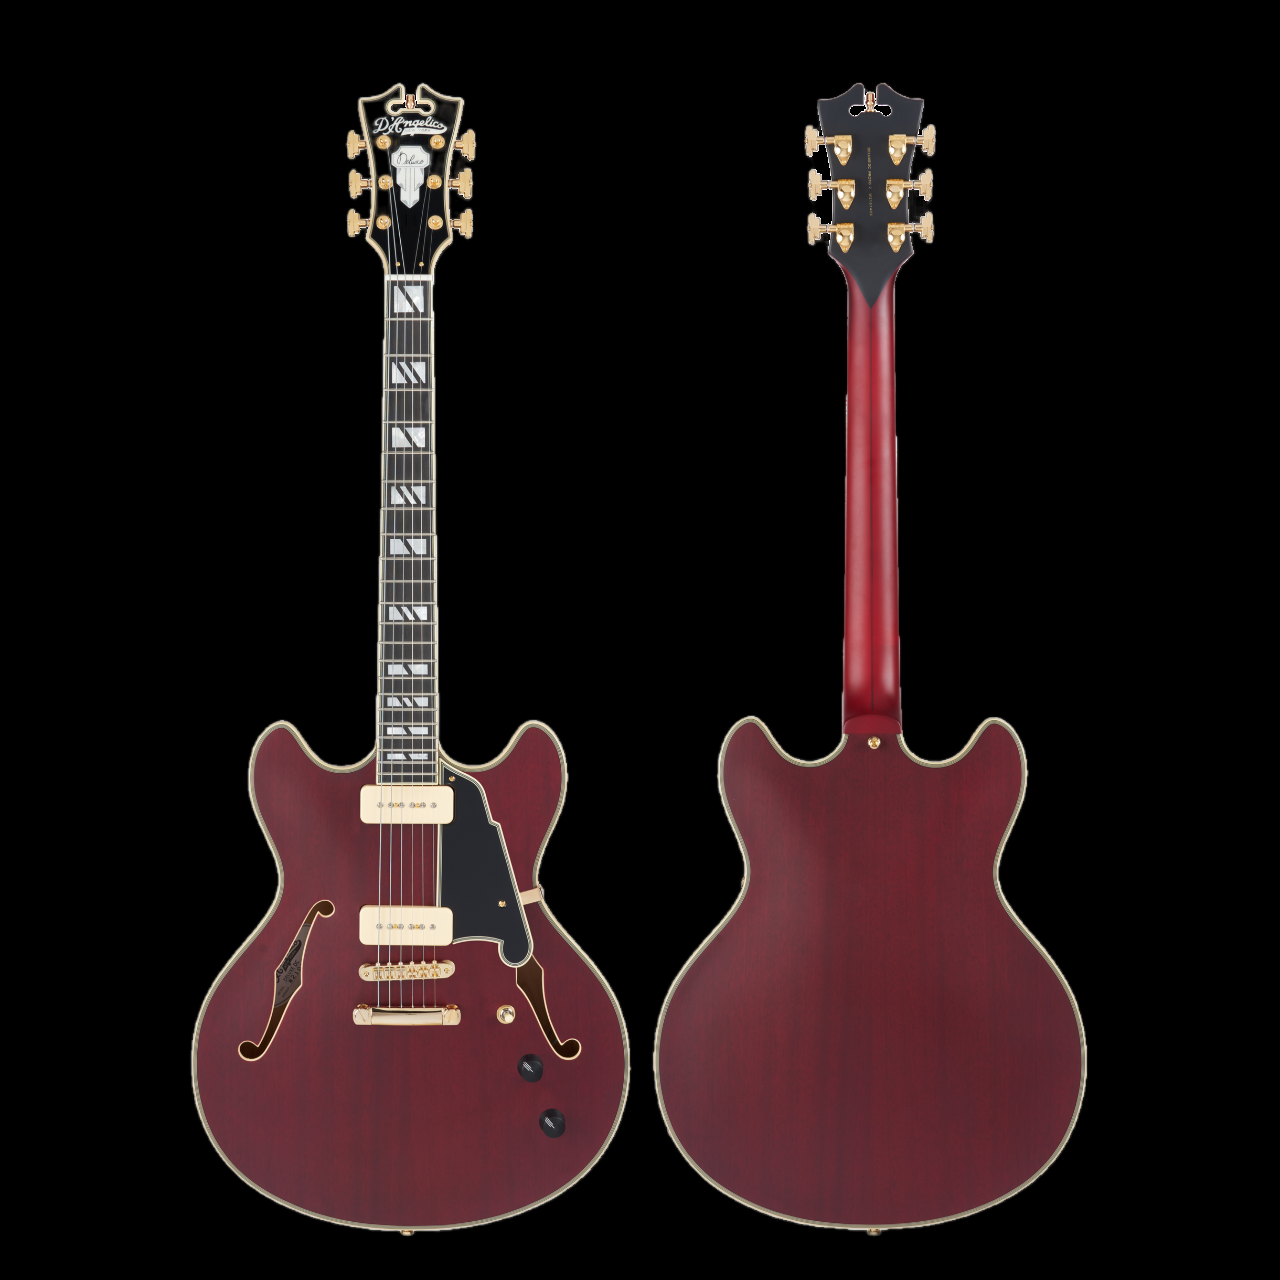 D'Angelico Deluxe DC Satin Trans Wine Electric Guitar